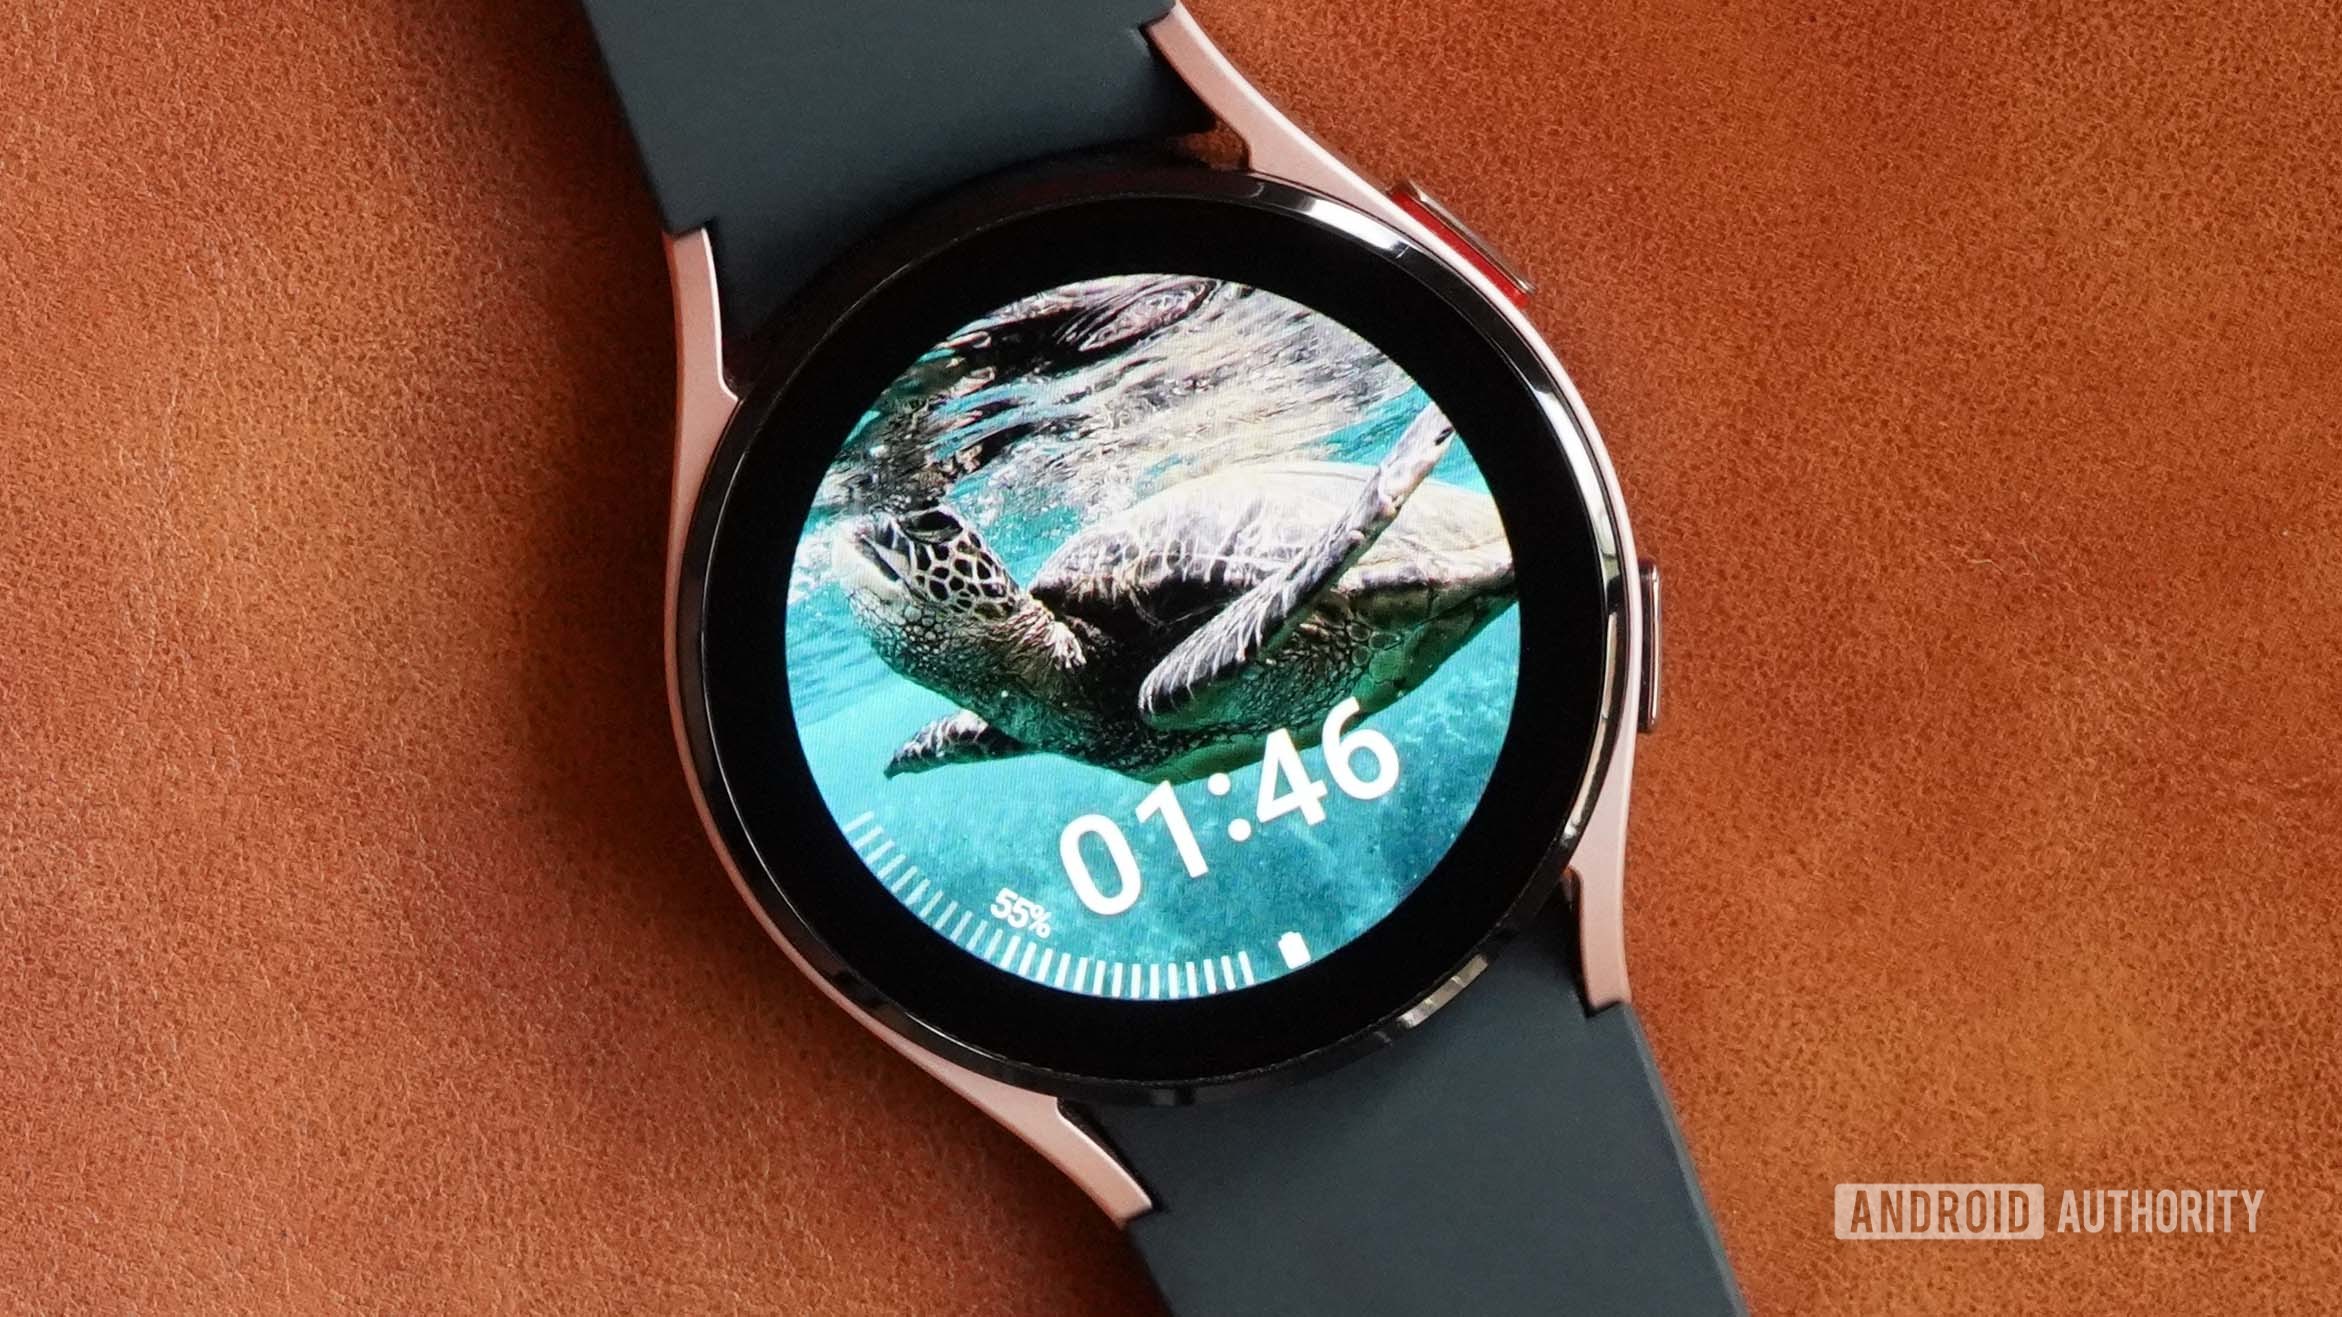 A Samsung Galaxy Watch 4 displays a turtle swimming as a user's watch face.